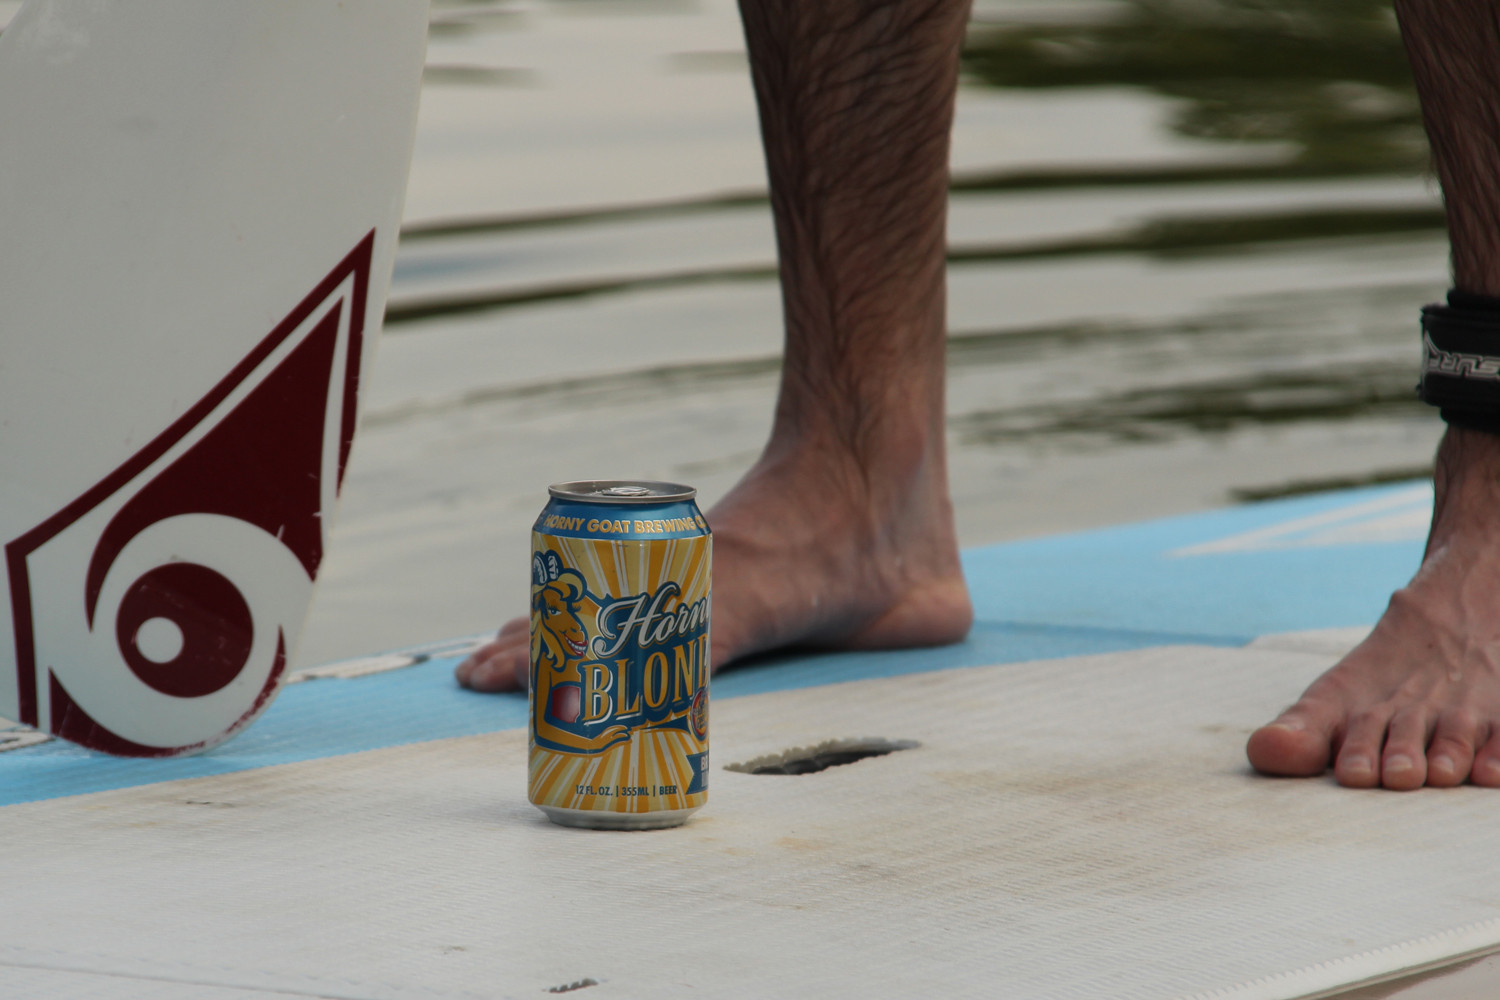 Horny Goat Blonde beer is great for summer paddle boarding.